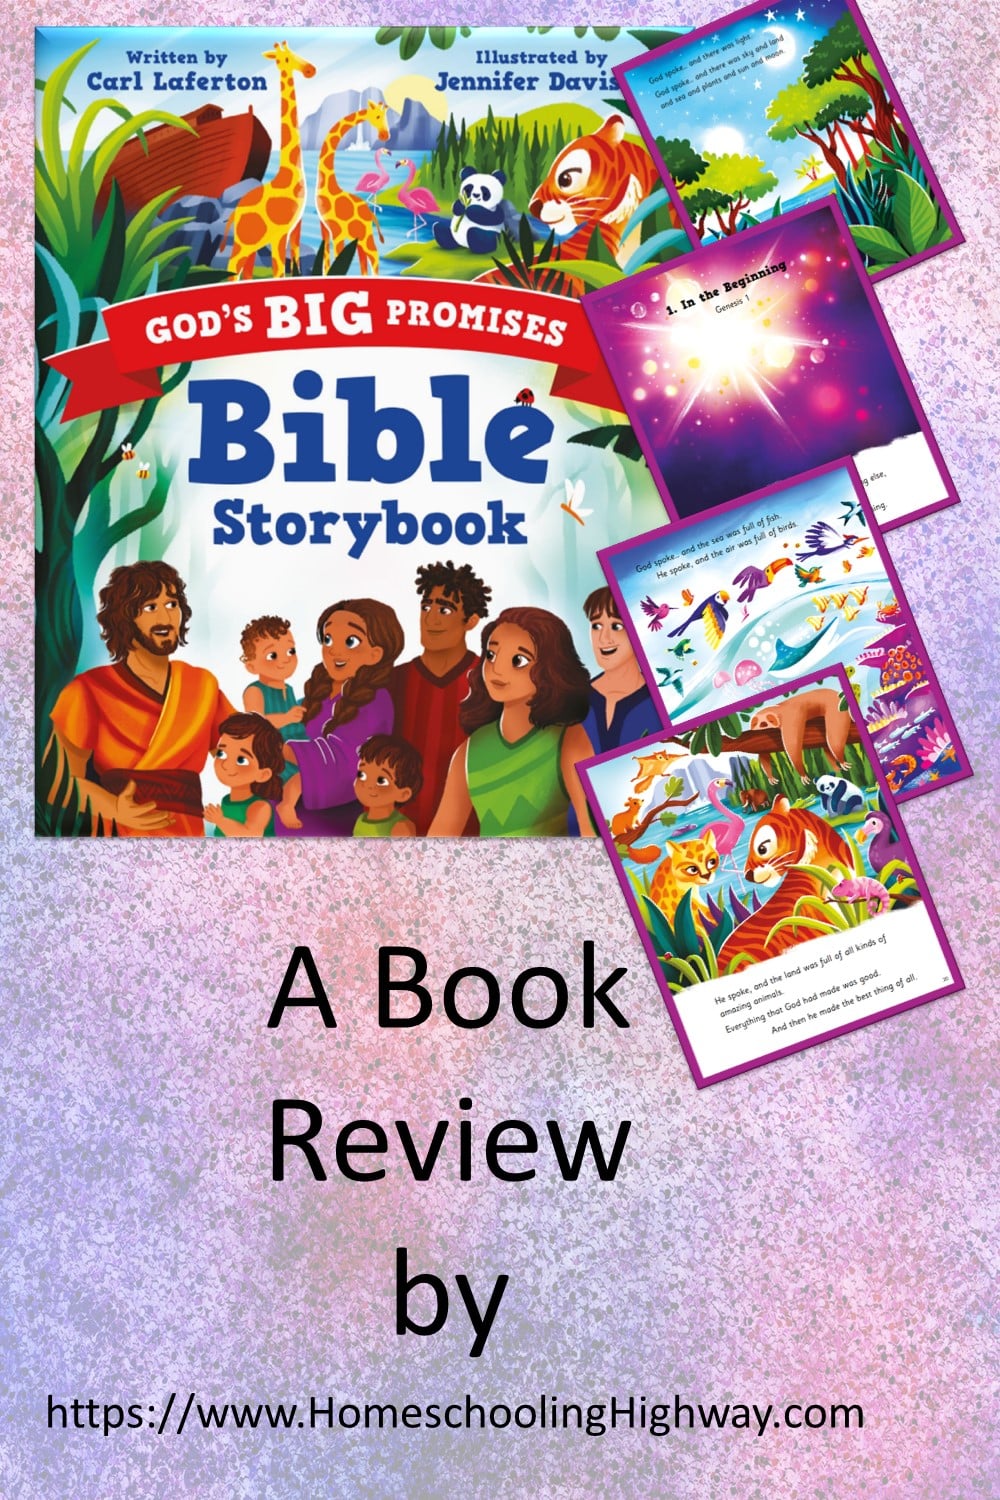 God's Big Promises Bible Storybook by Carl Laferton. Reviewed by Homeschooling Highway